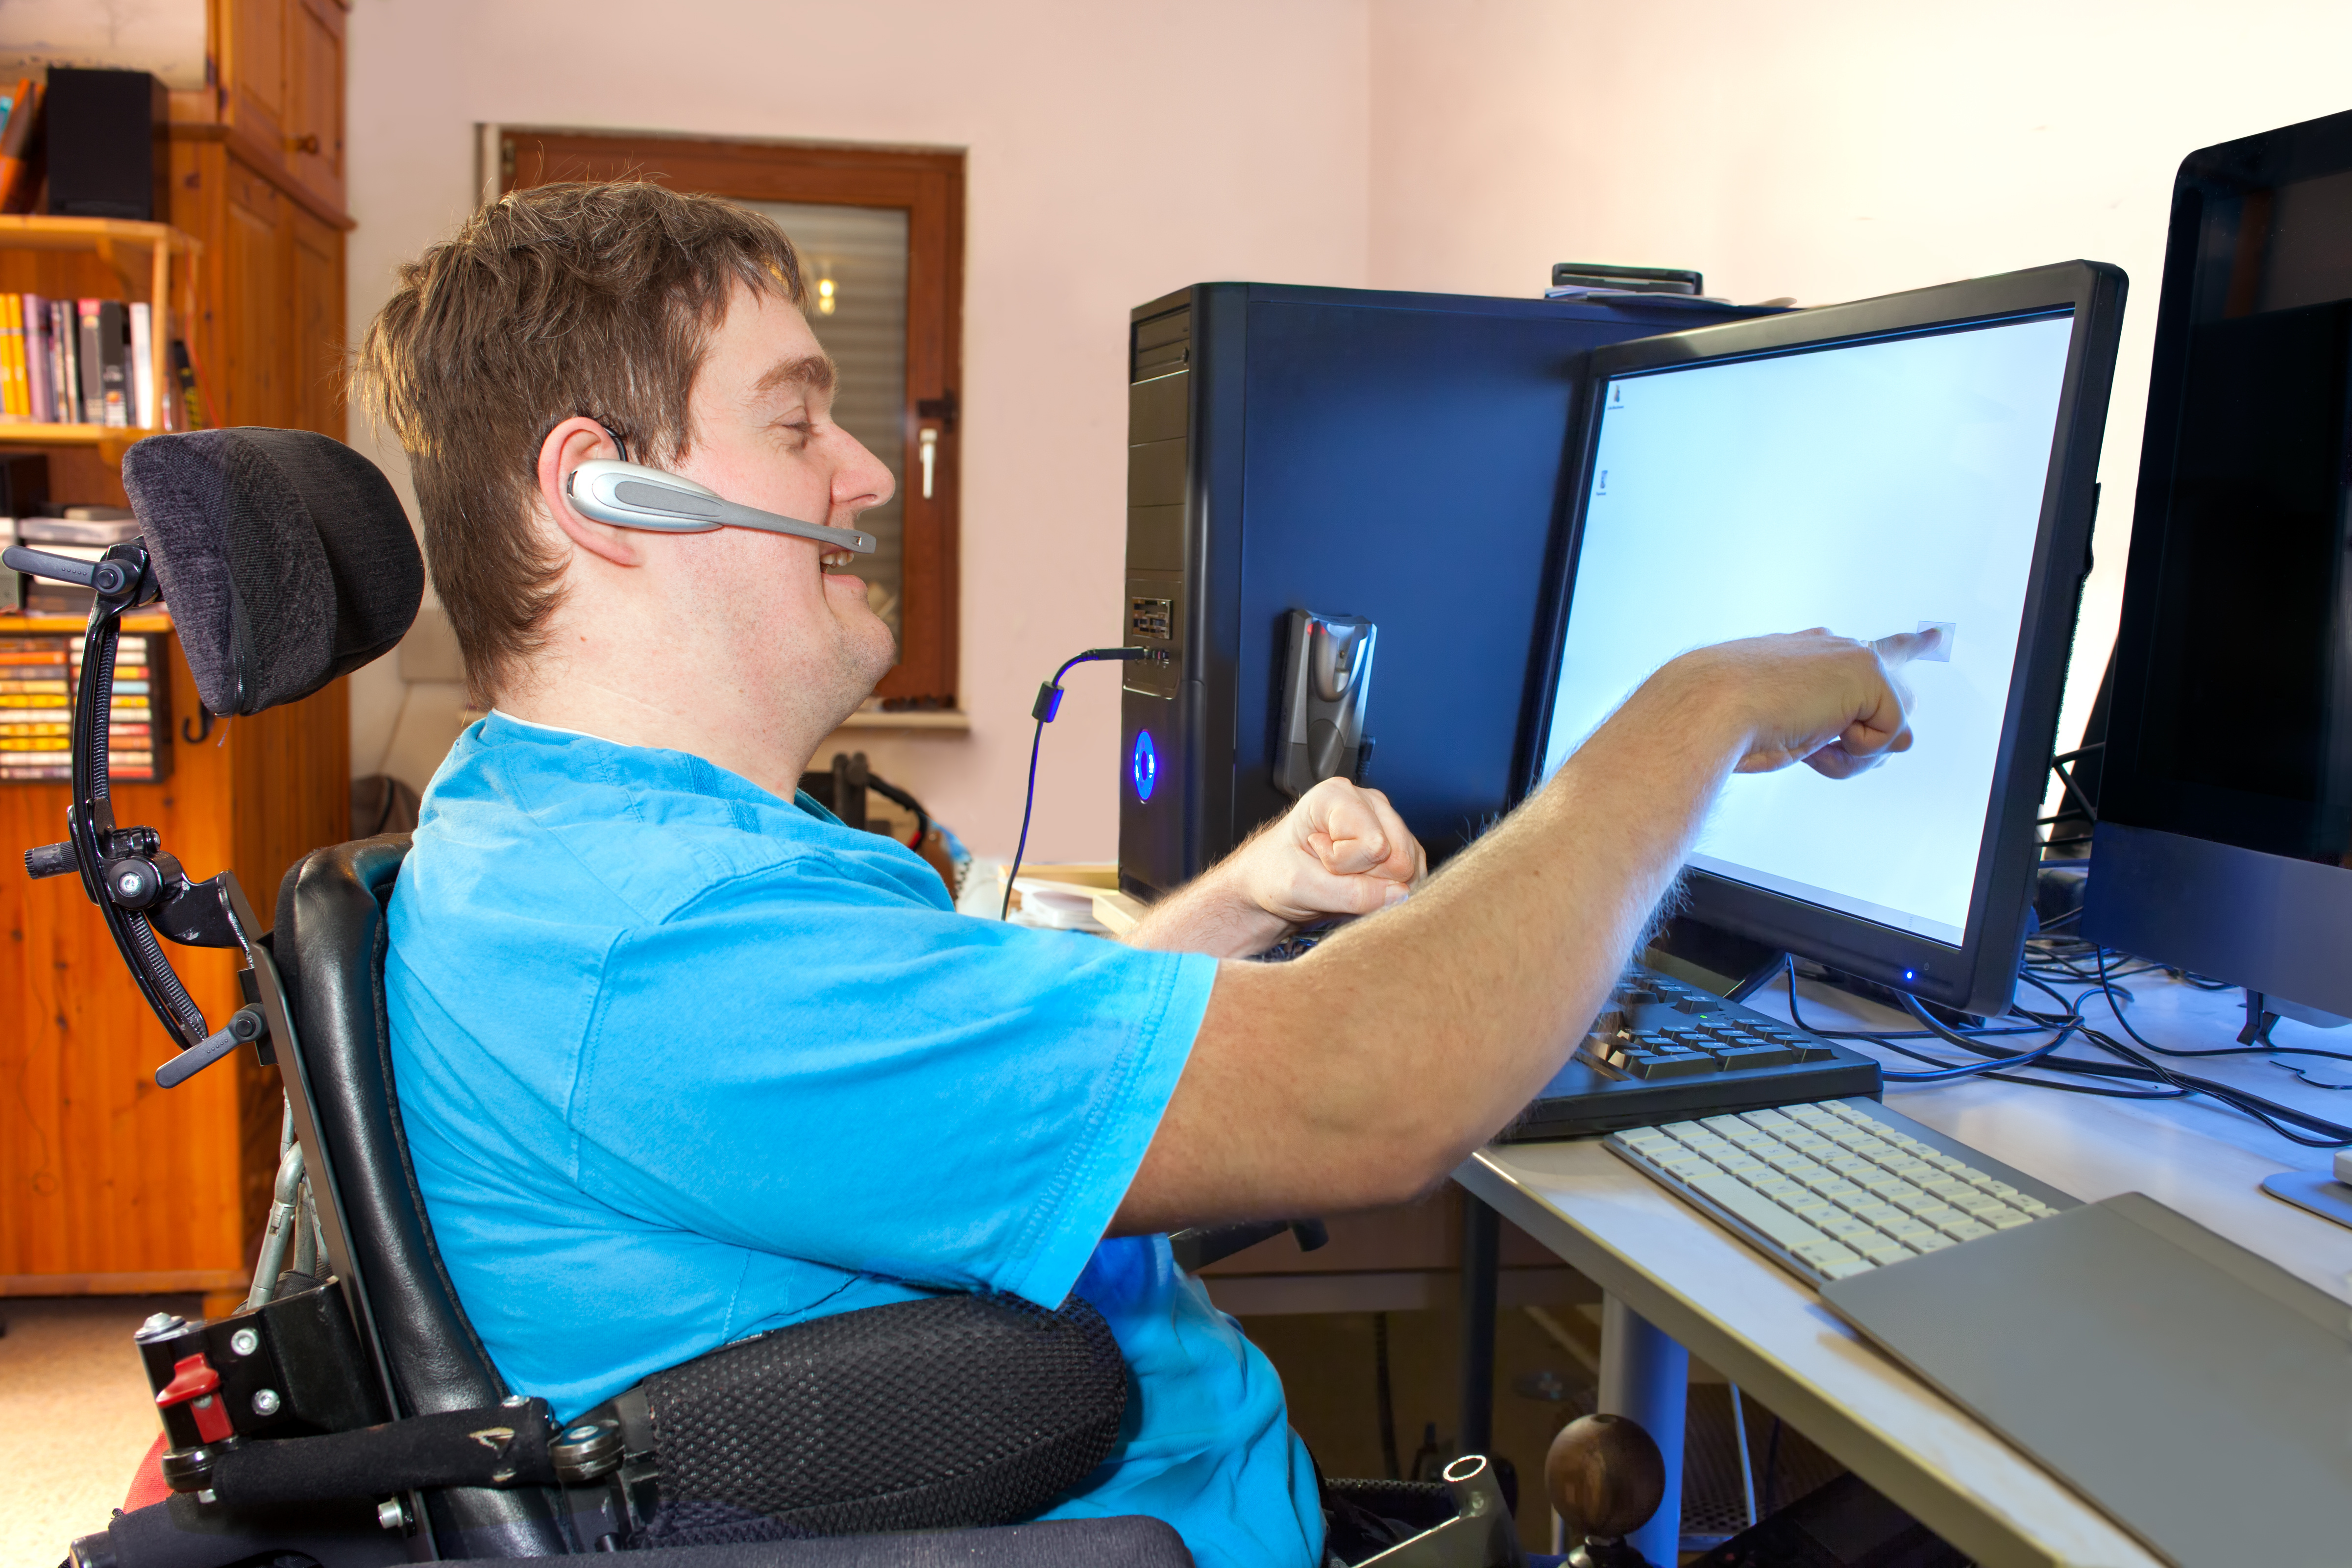 "A young man wearing a blue t-shirt sitting in a wheelchair uses a computer"